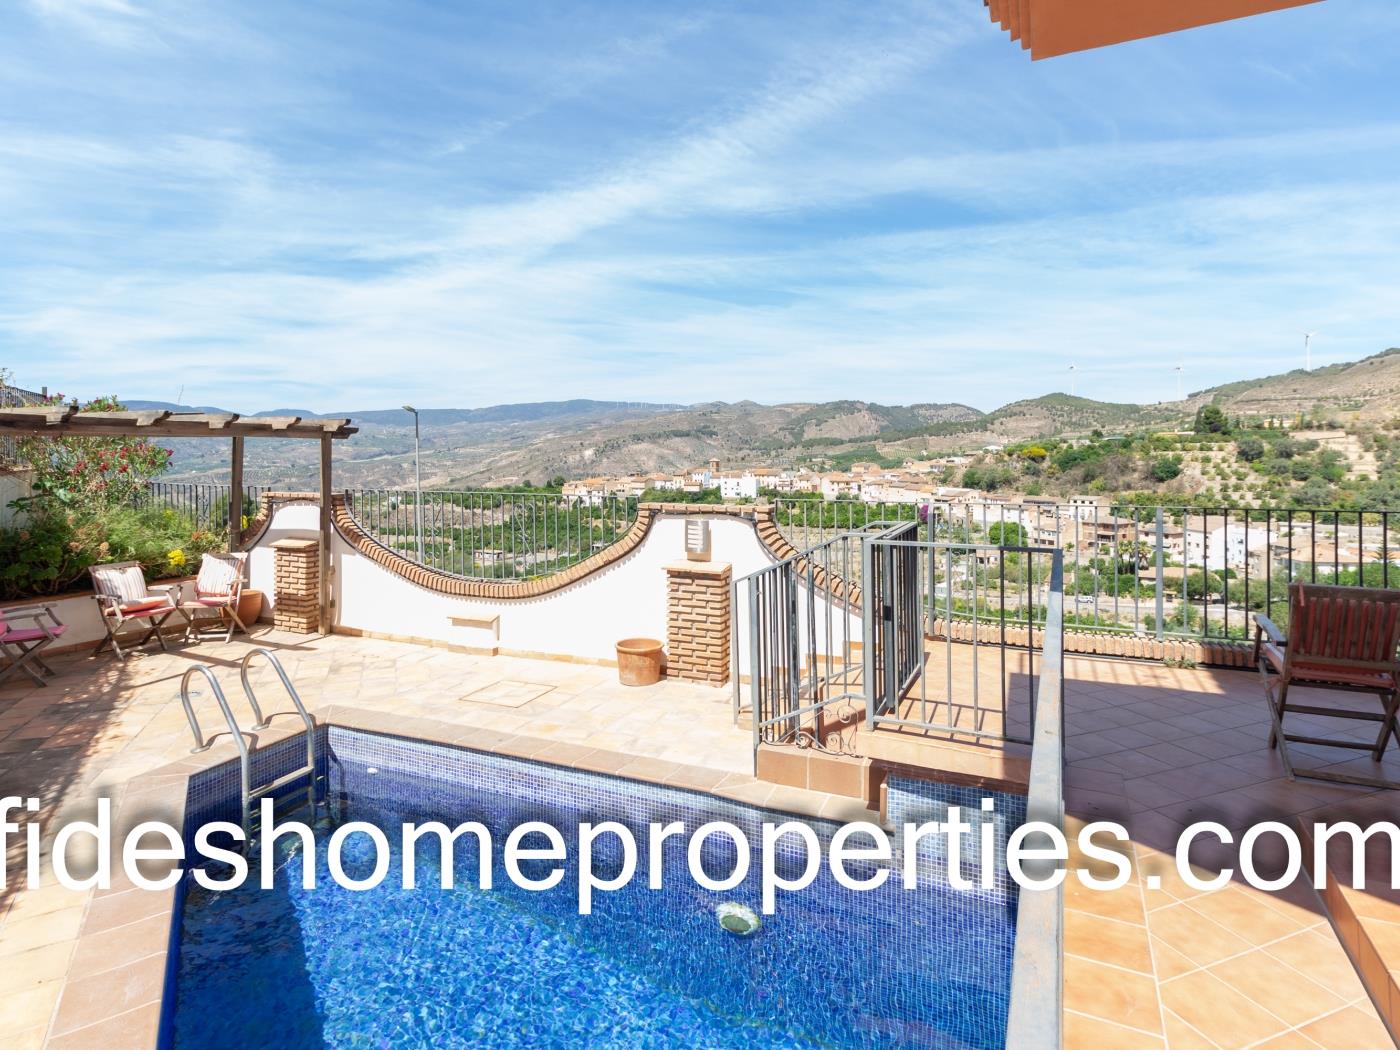 Detached Villa with Terrace, Garden, Pool, and Magnificent Views in Lecrín. in Talará